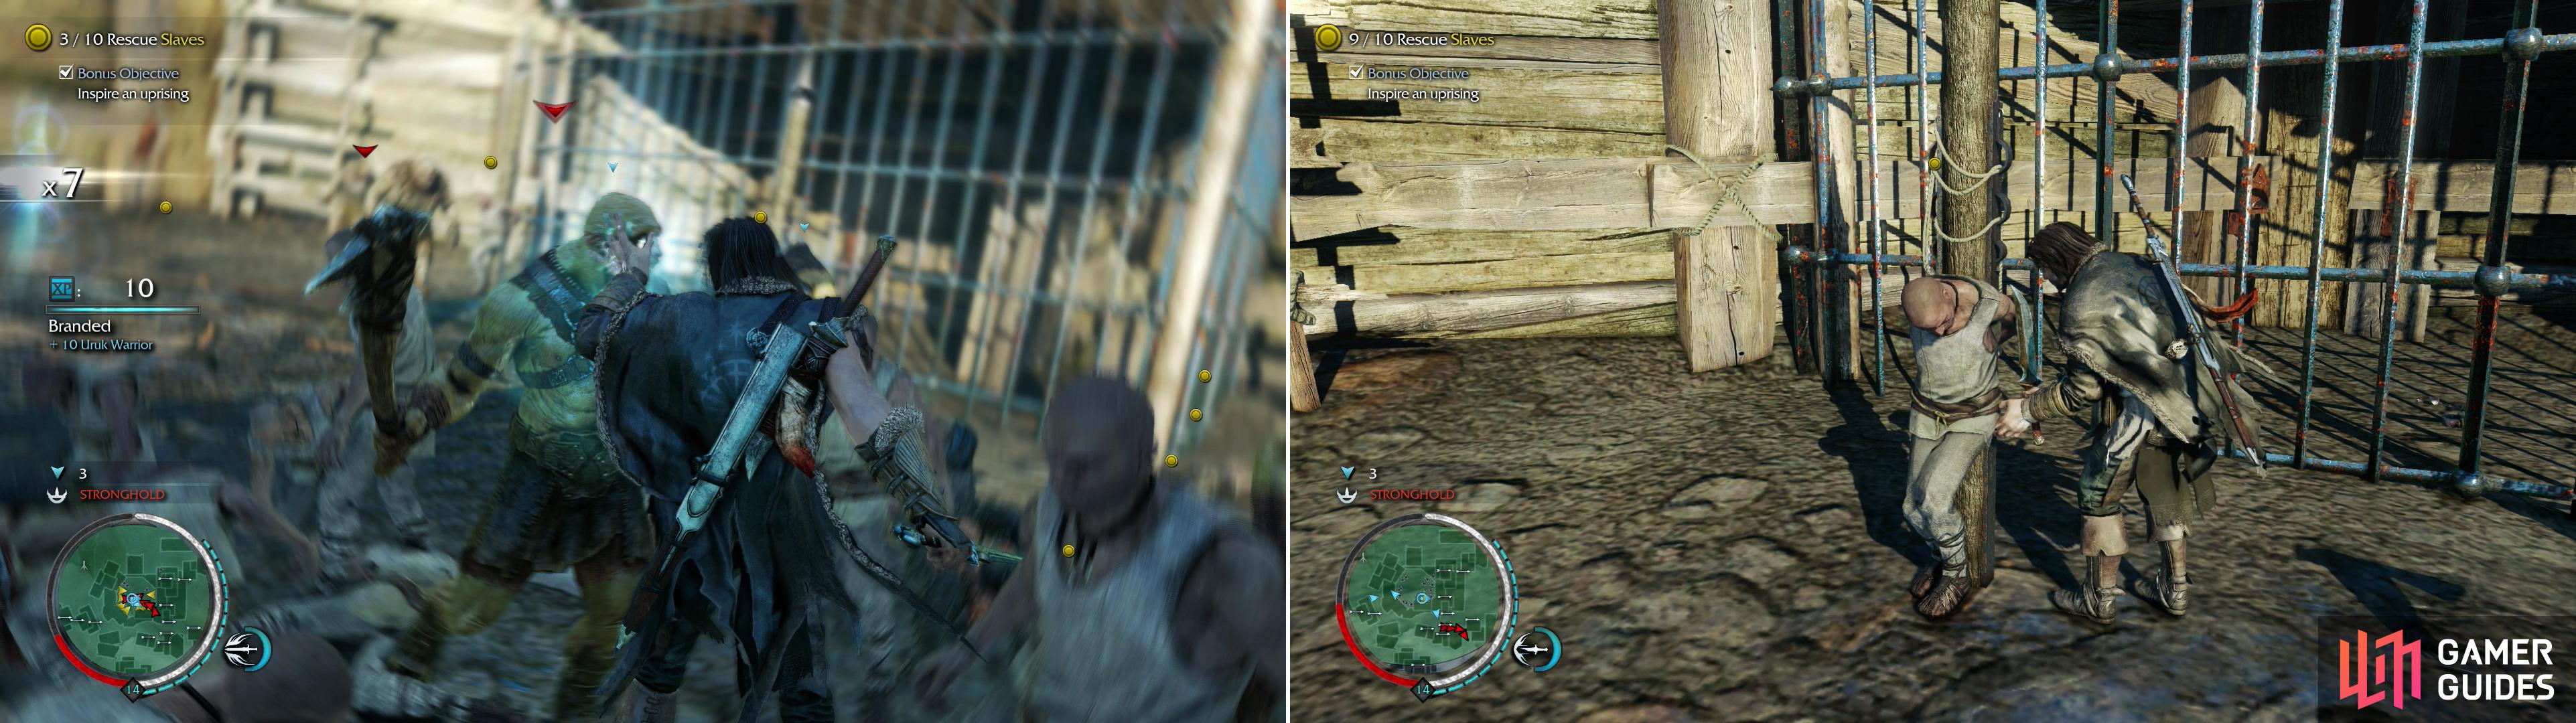 Combat Brand some Uruks to give you some allies (left) then free enough slaves to inspire an uprising (right).